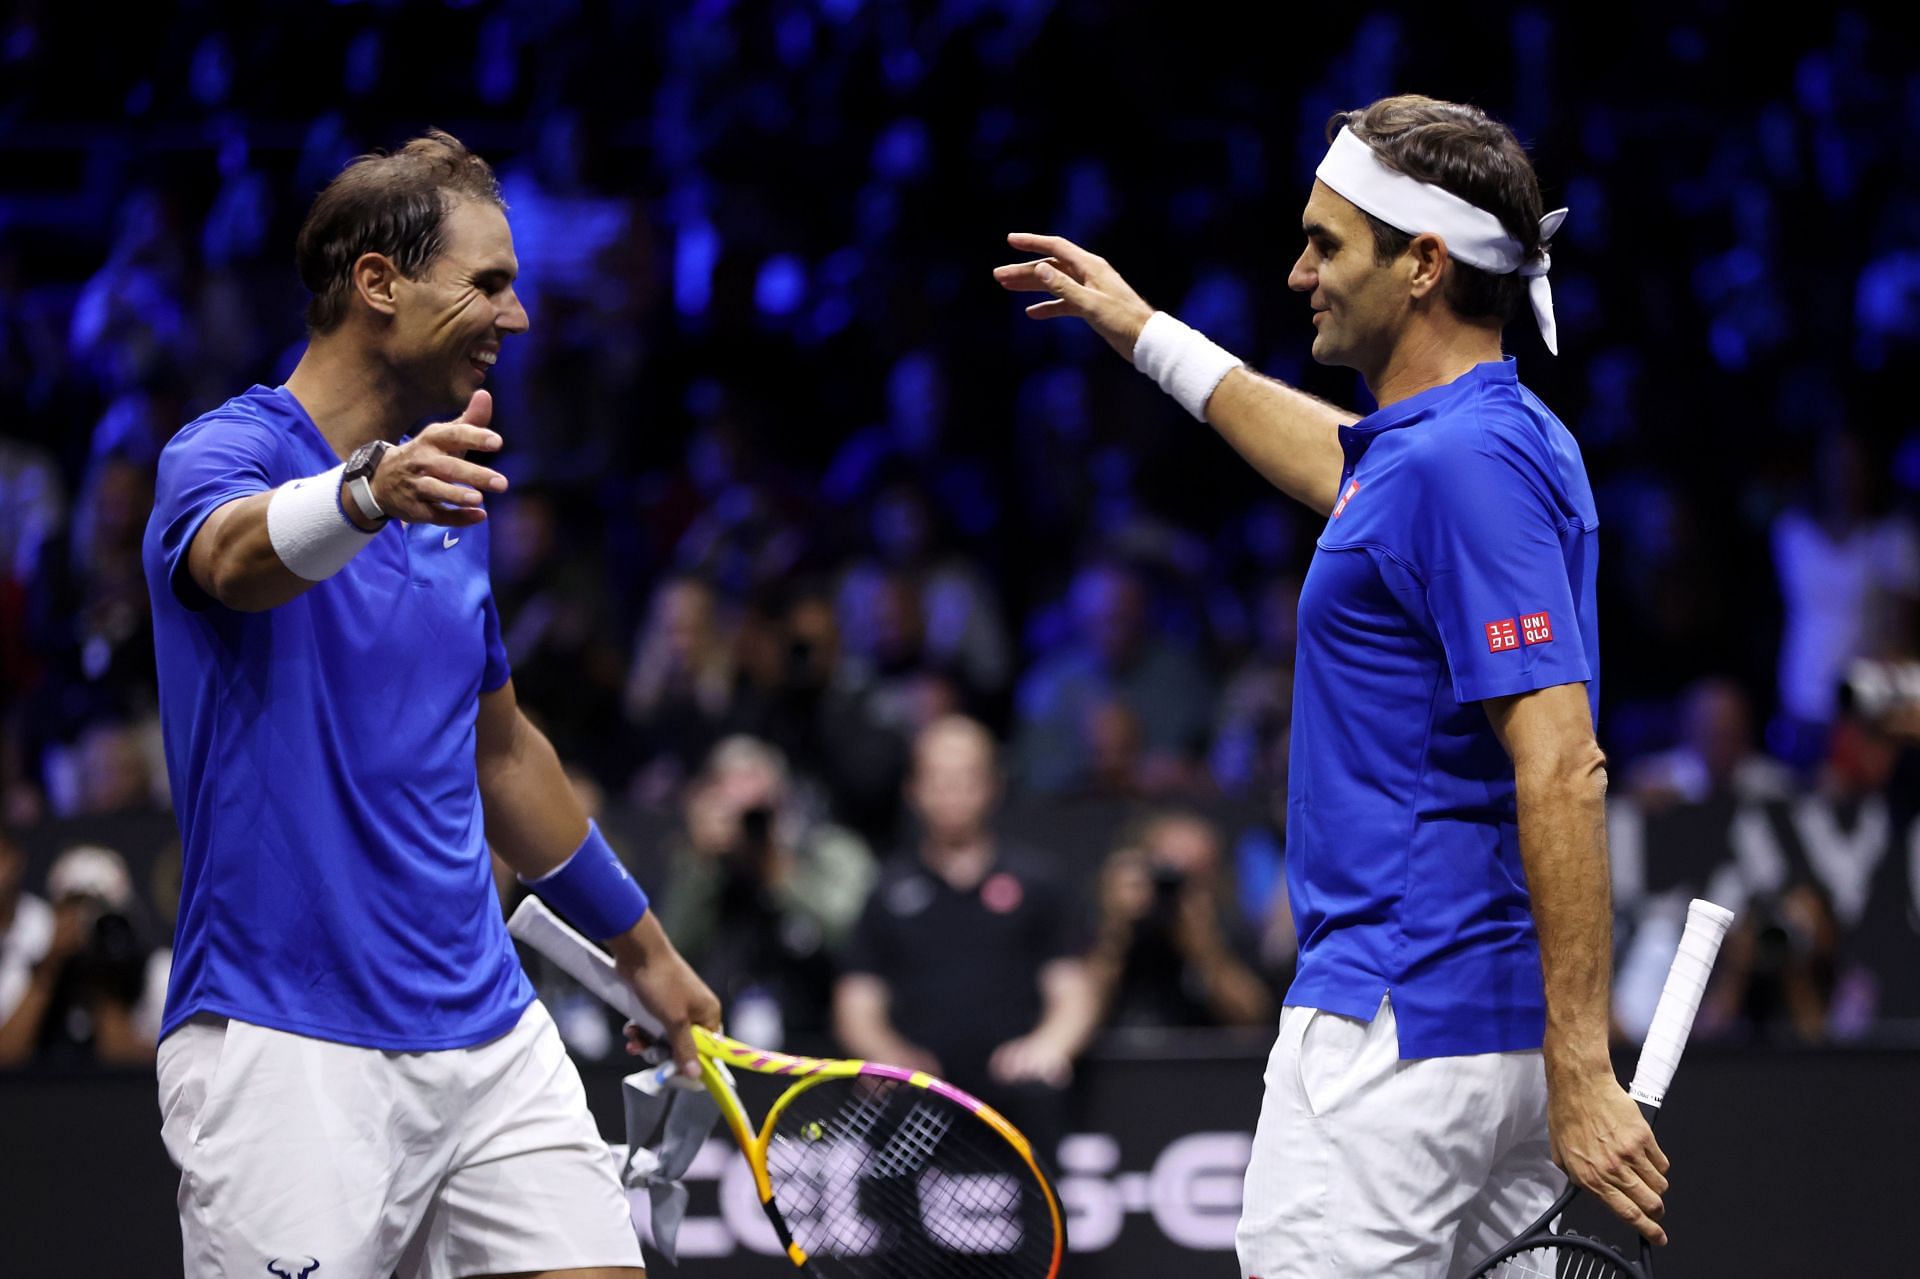 Rafael Nadal and Roger Federer react after their doubles match at the 2022 Laver Cup 